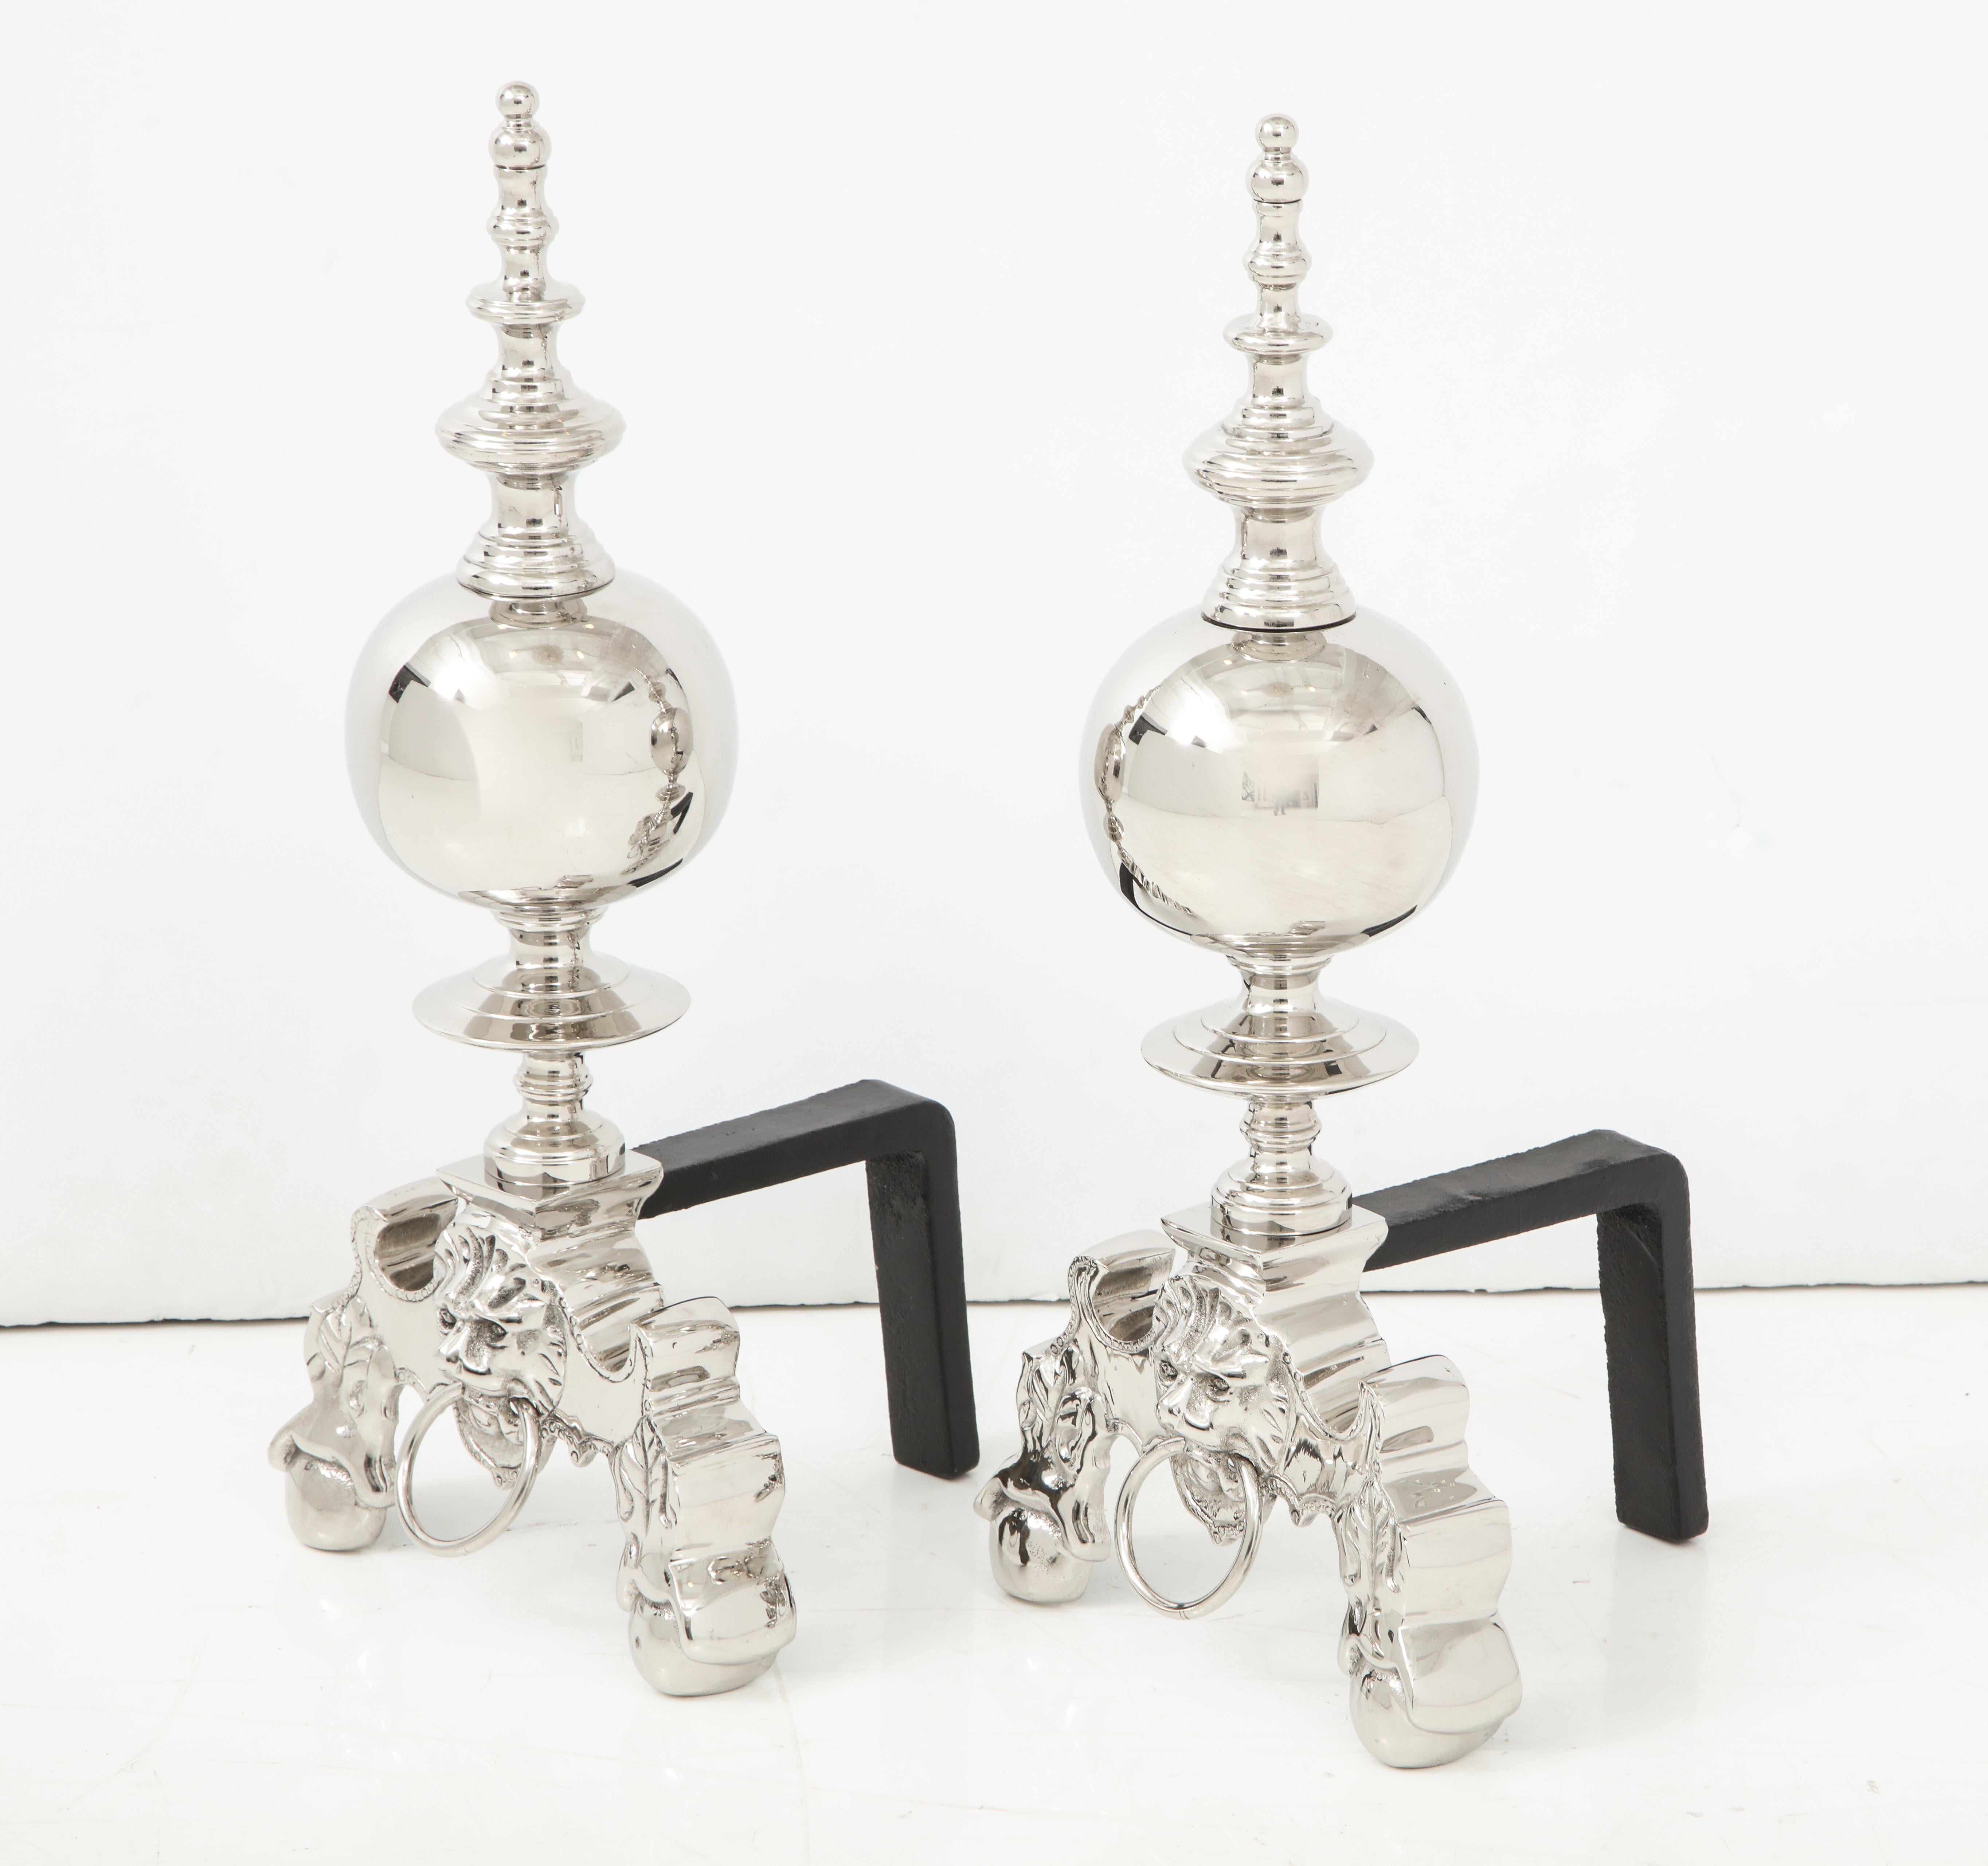 Pair of stylish polished nickel andirons with lion's head with ring front details and tapering spire with blackened iron backs. Professionally polished.